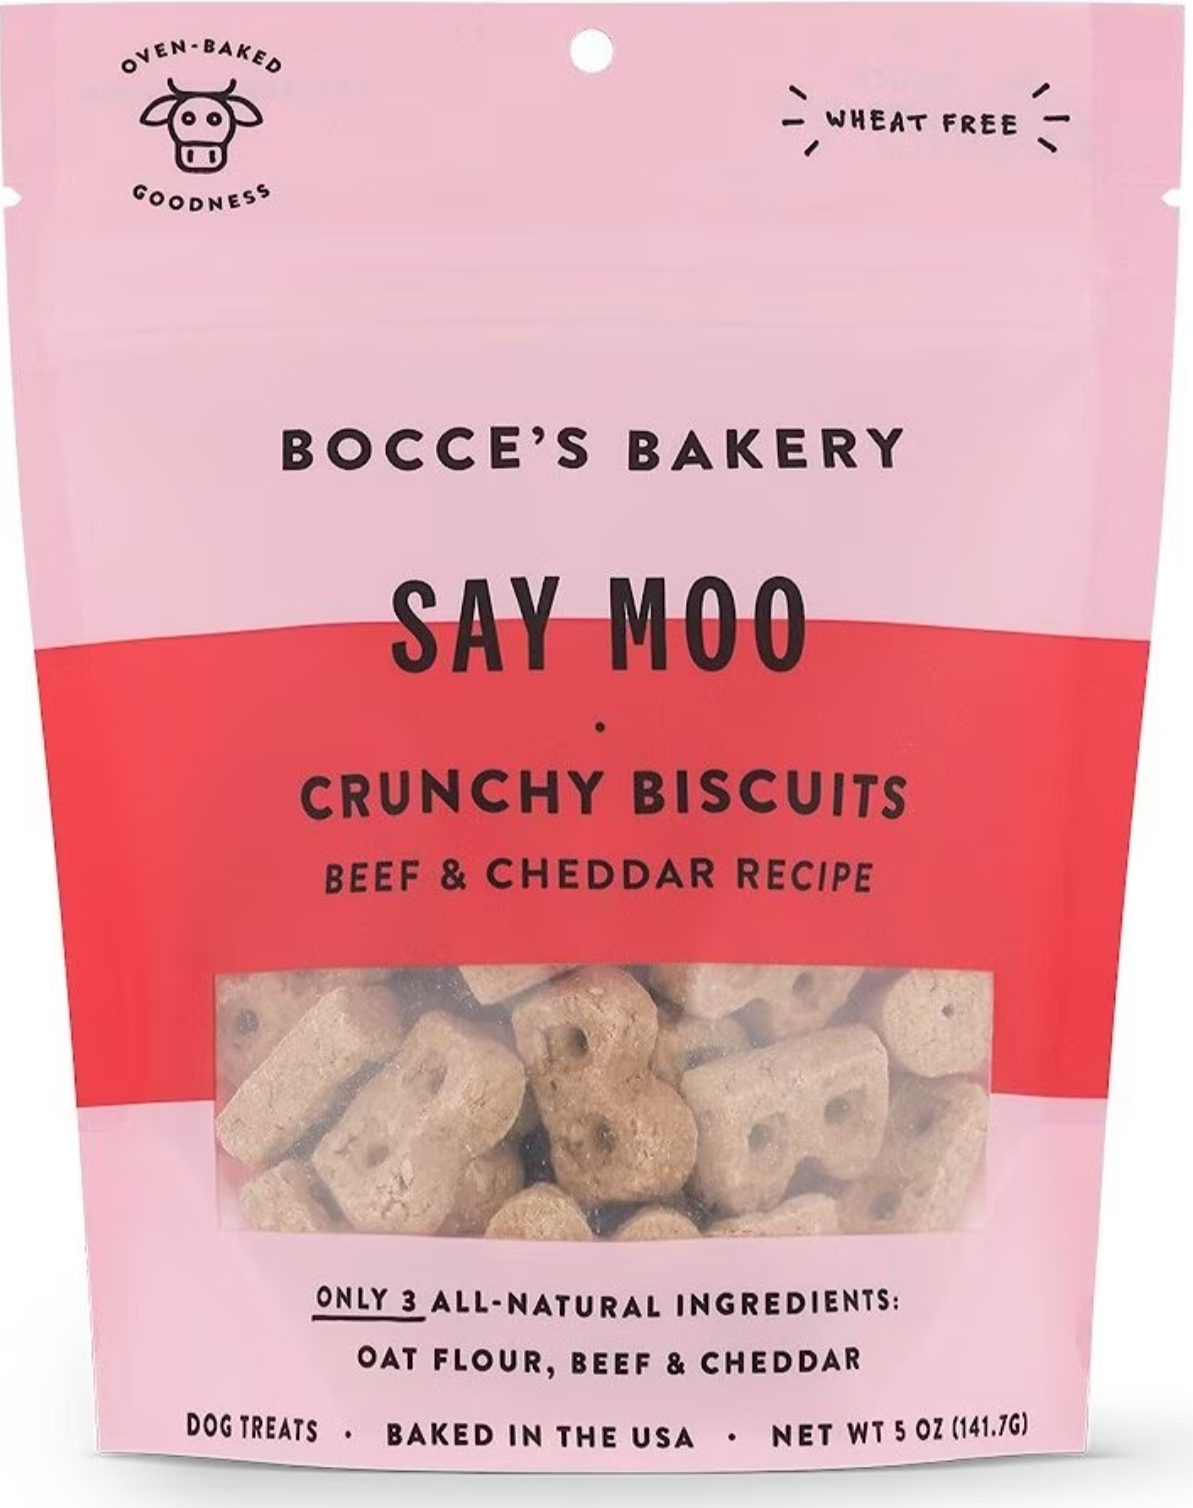 Bocce's Bakery Crunchy Biscuits